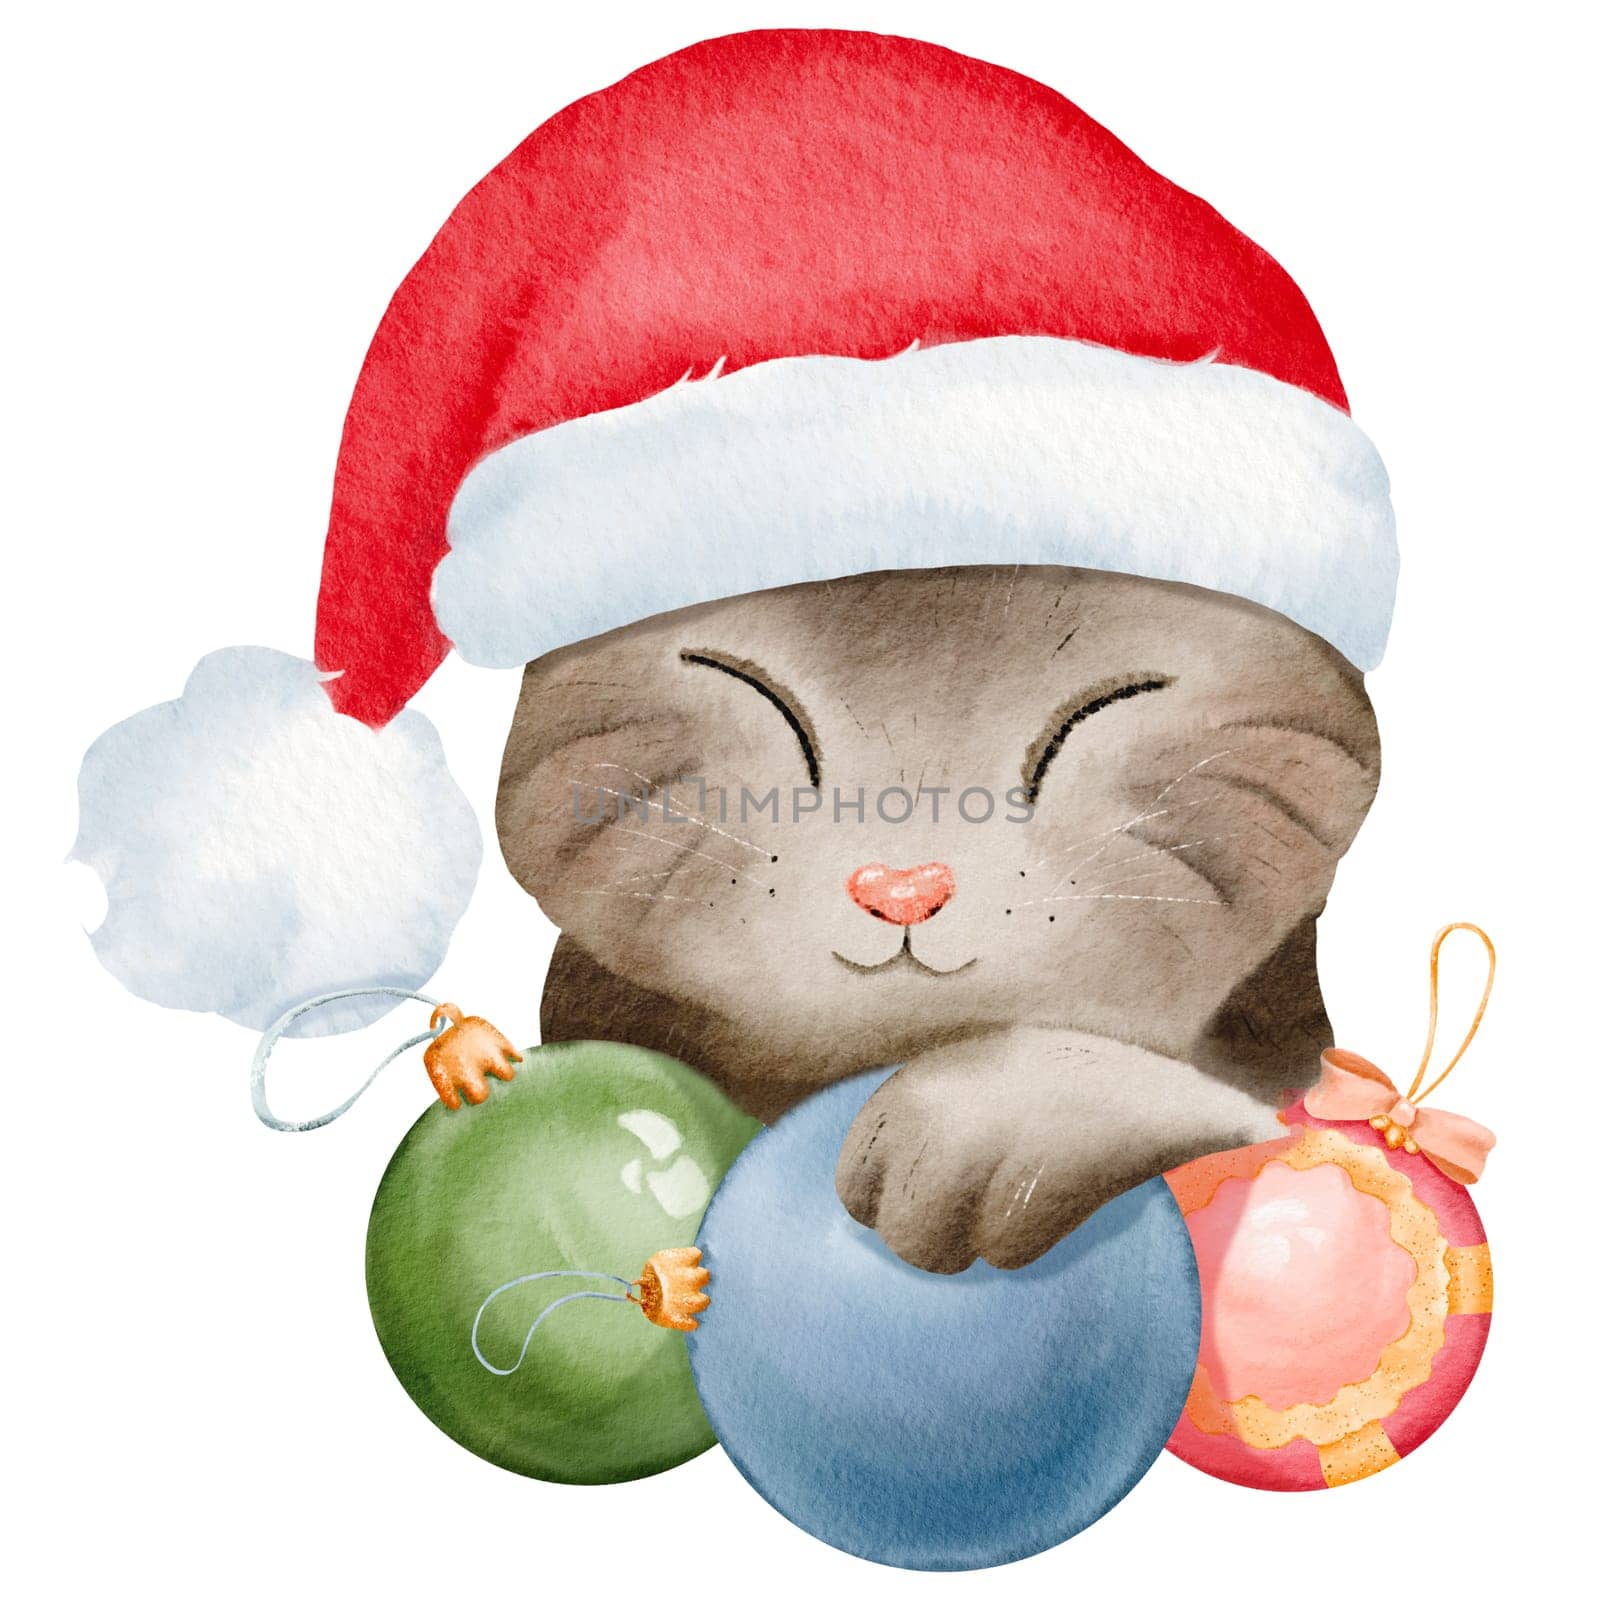 Cozy striped kitten in a Santa hat peacefully sleeps on Christmas ornaments. Cartoon cat portrait evokes a festive atmosphere. Perfect for cards, invites, posters, stickers. Watercolor illustration by Art_Mari_Ka